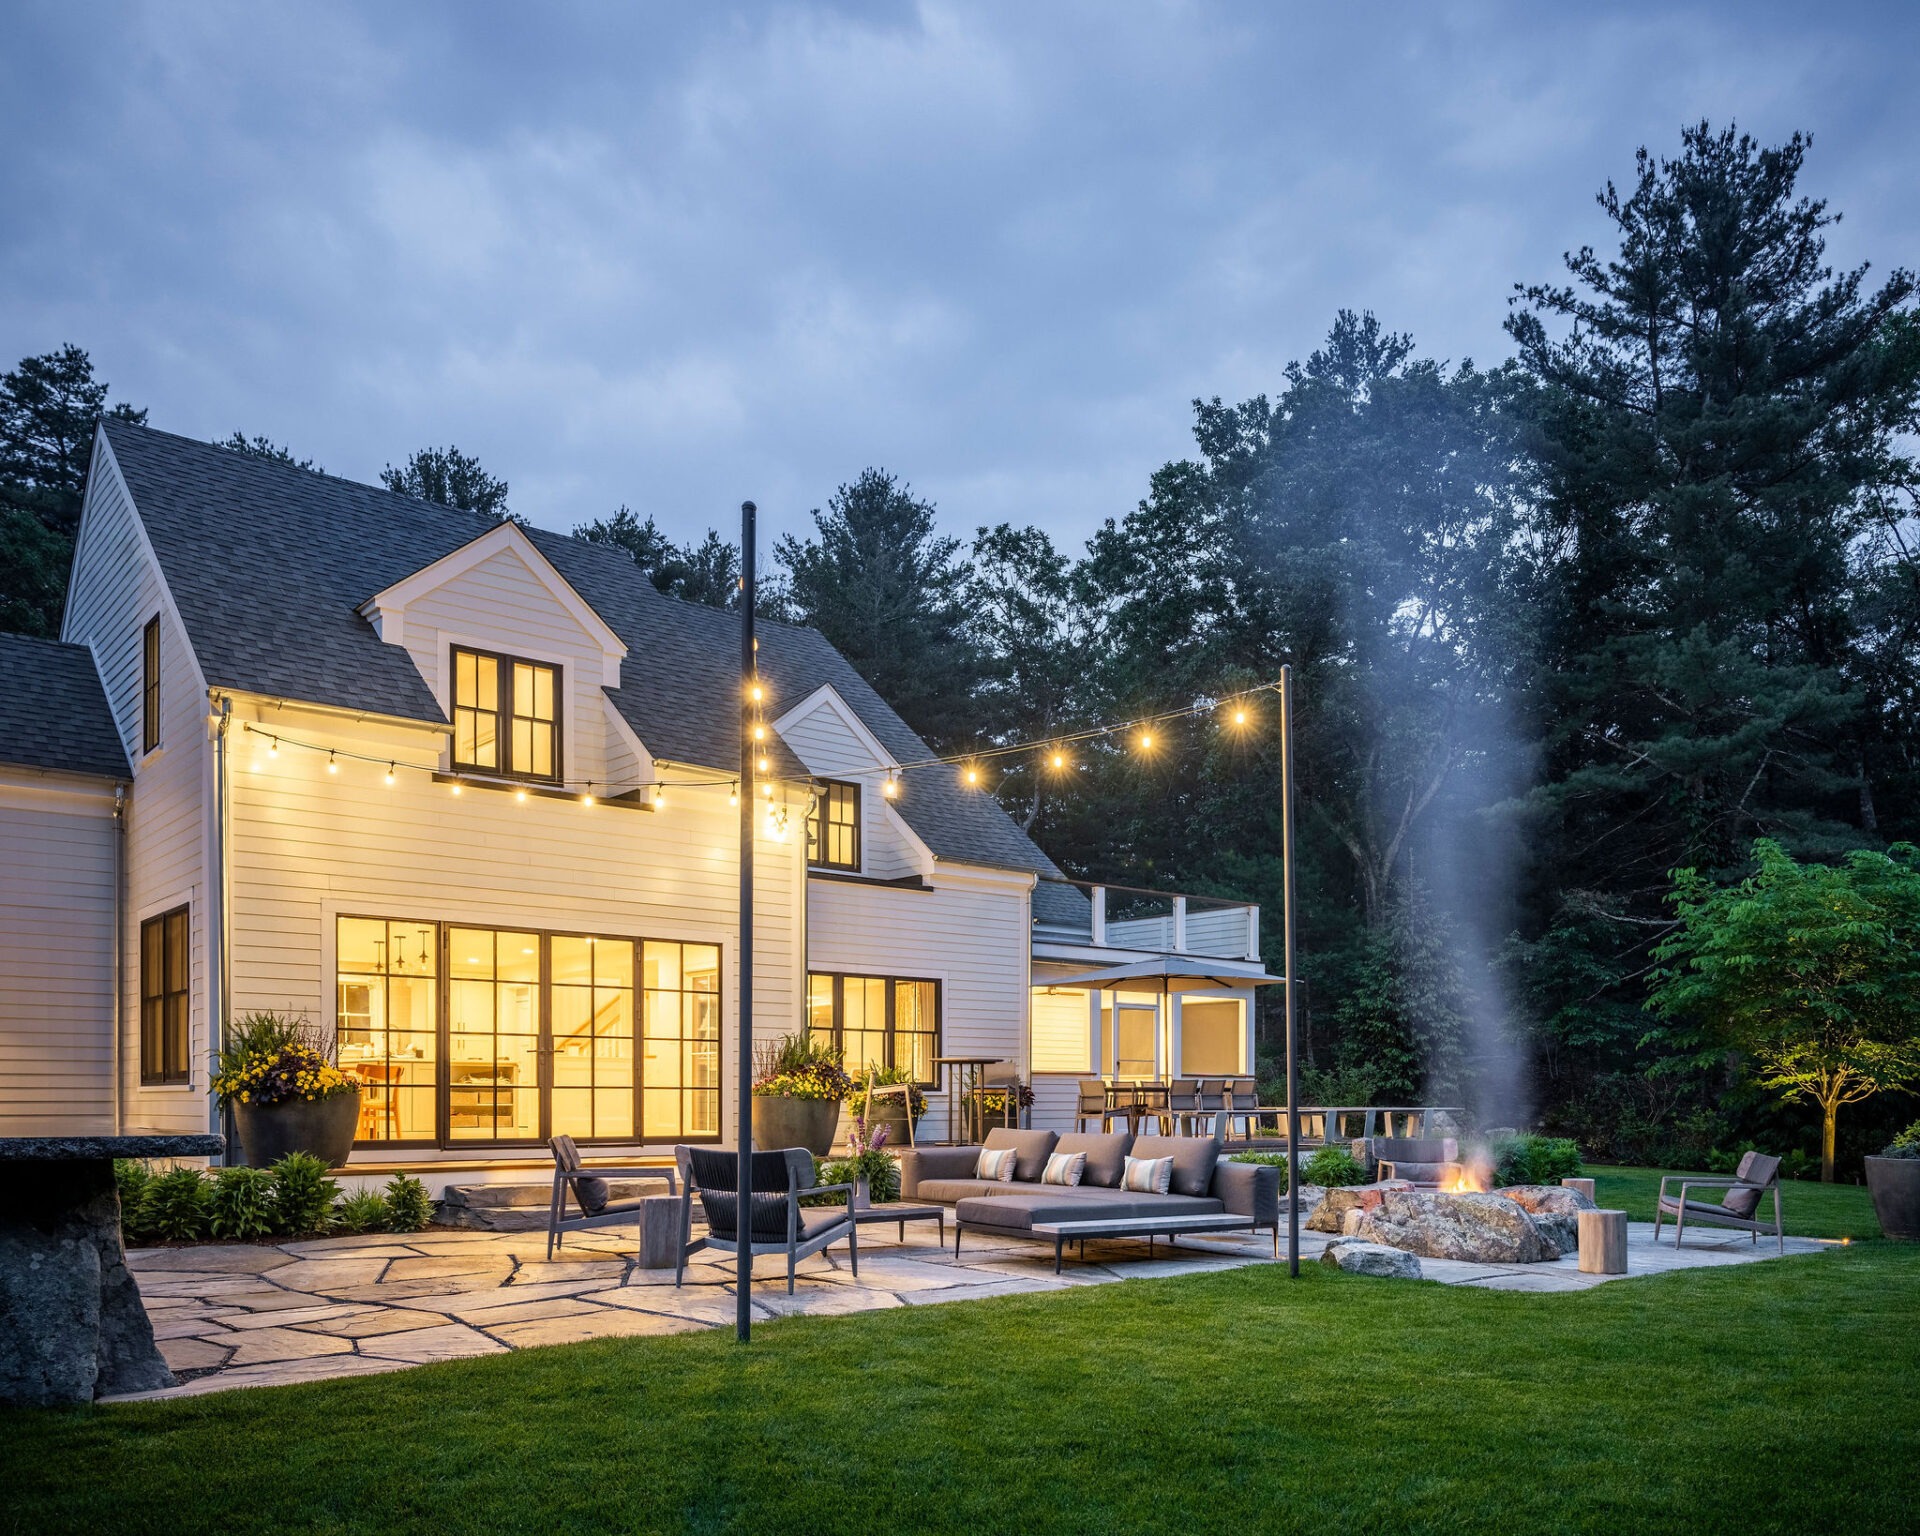 A dusk view of a cozy, illuminated backyard featuring an elegant home, strung lights, outdoor seating, a fire pit, well-maintained lawn, and trees.